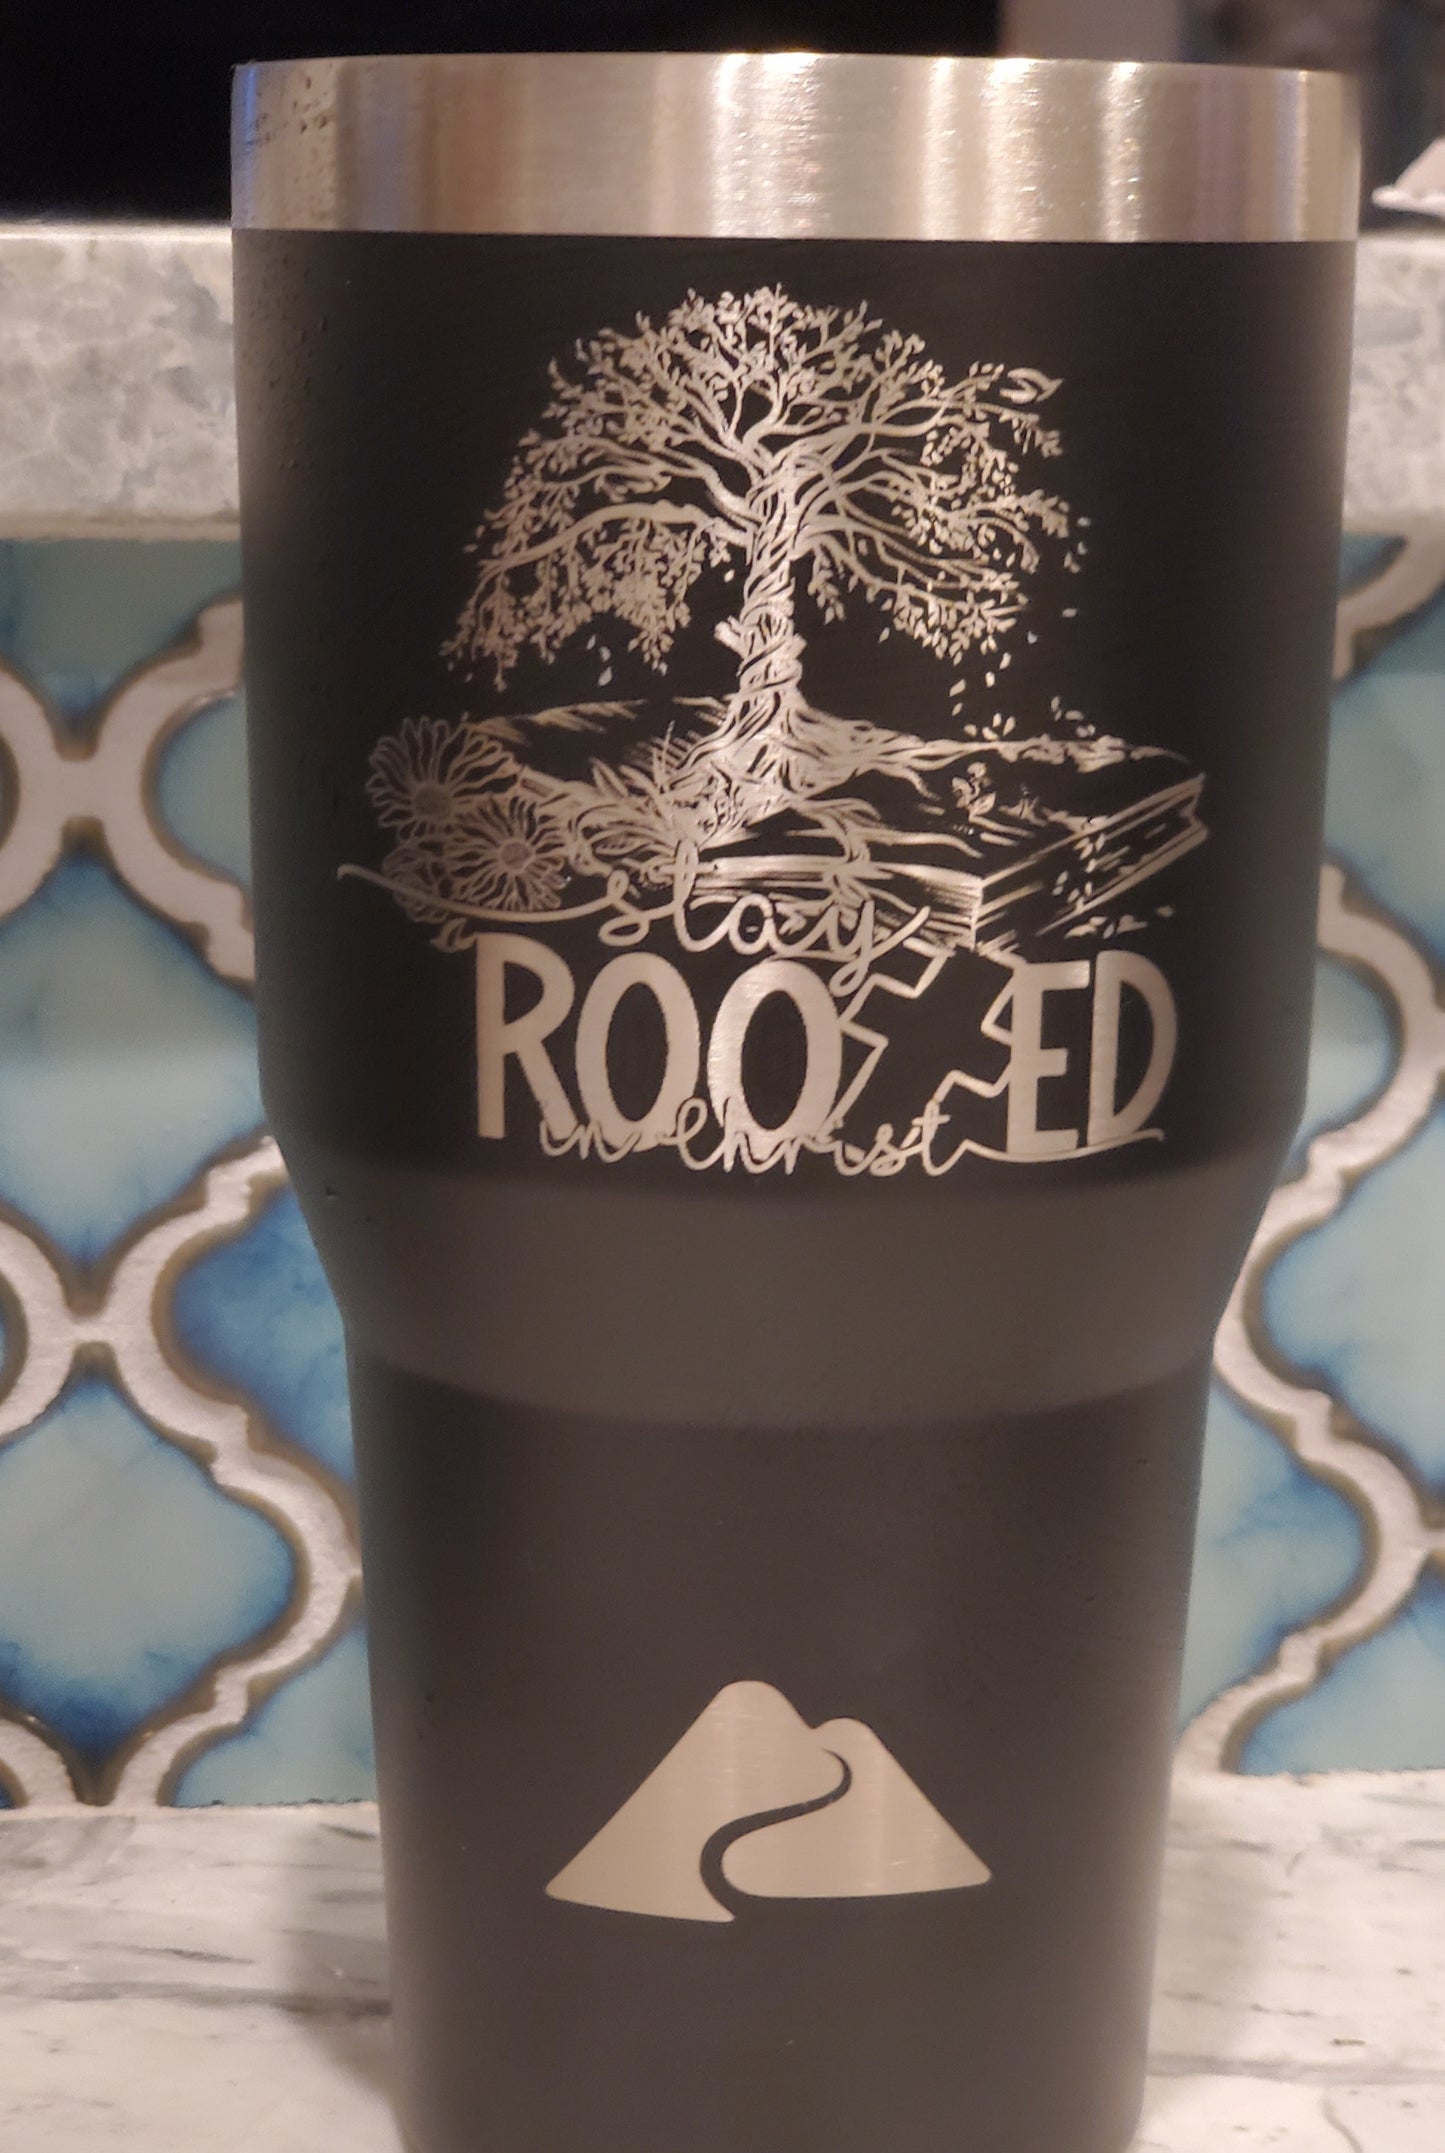 Stay rooted in Christ tumbler